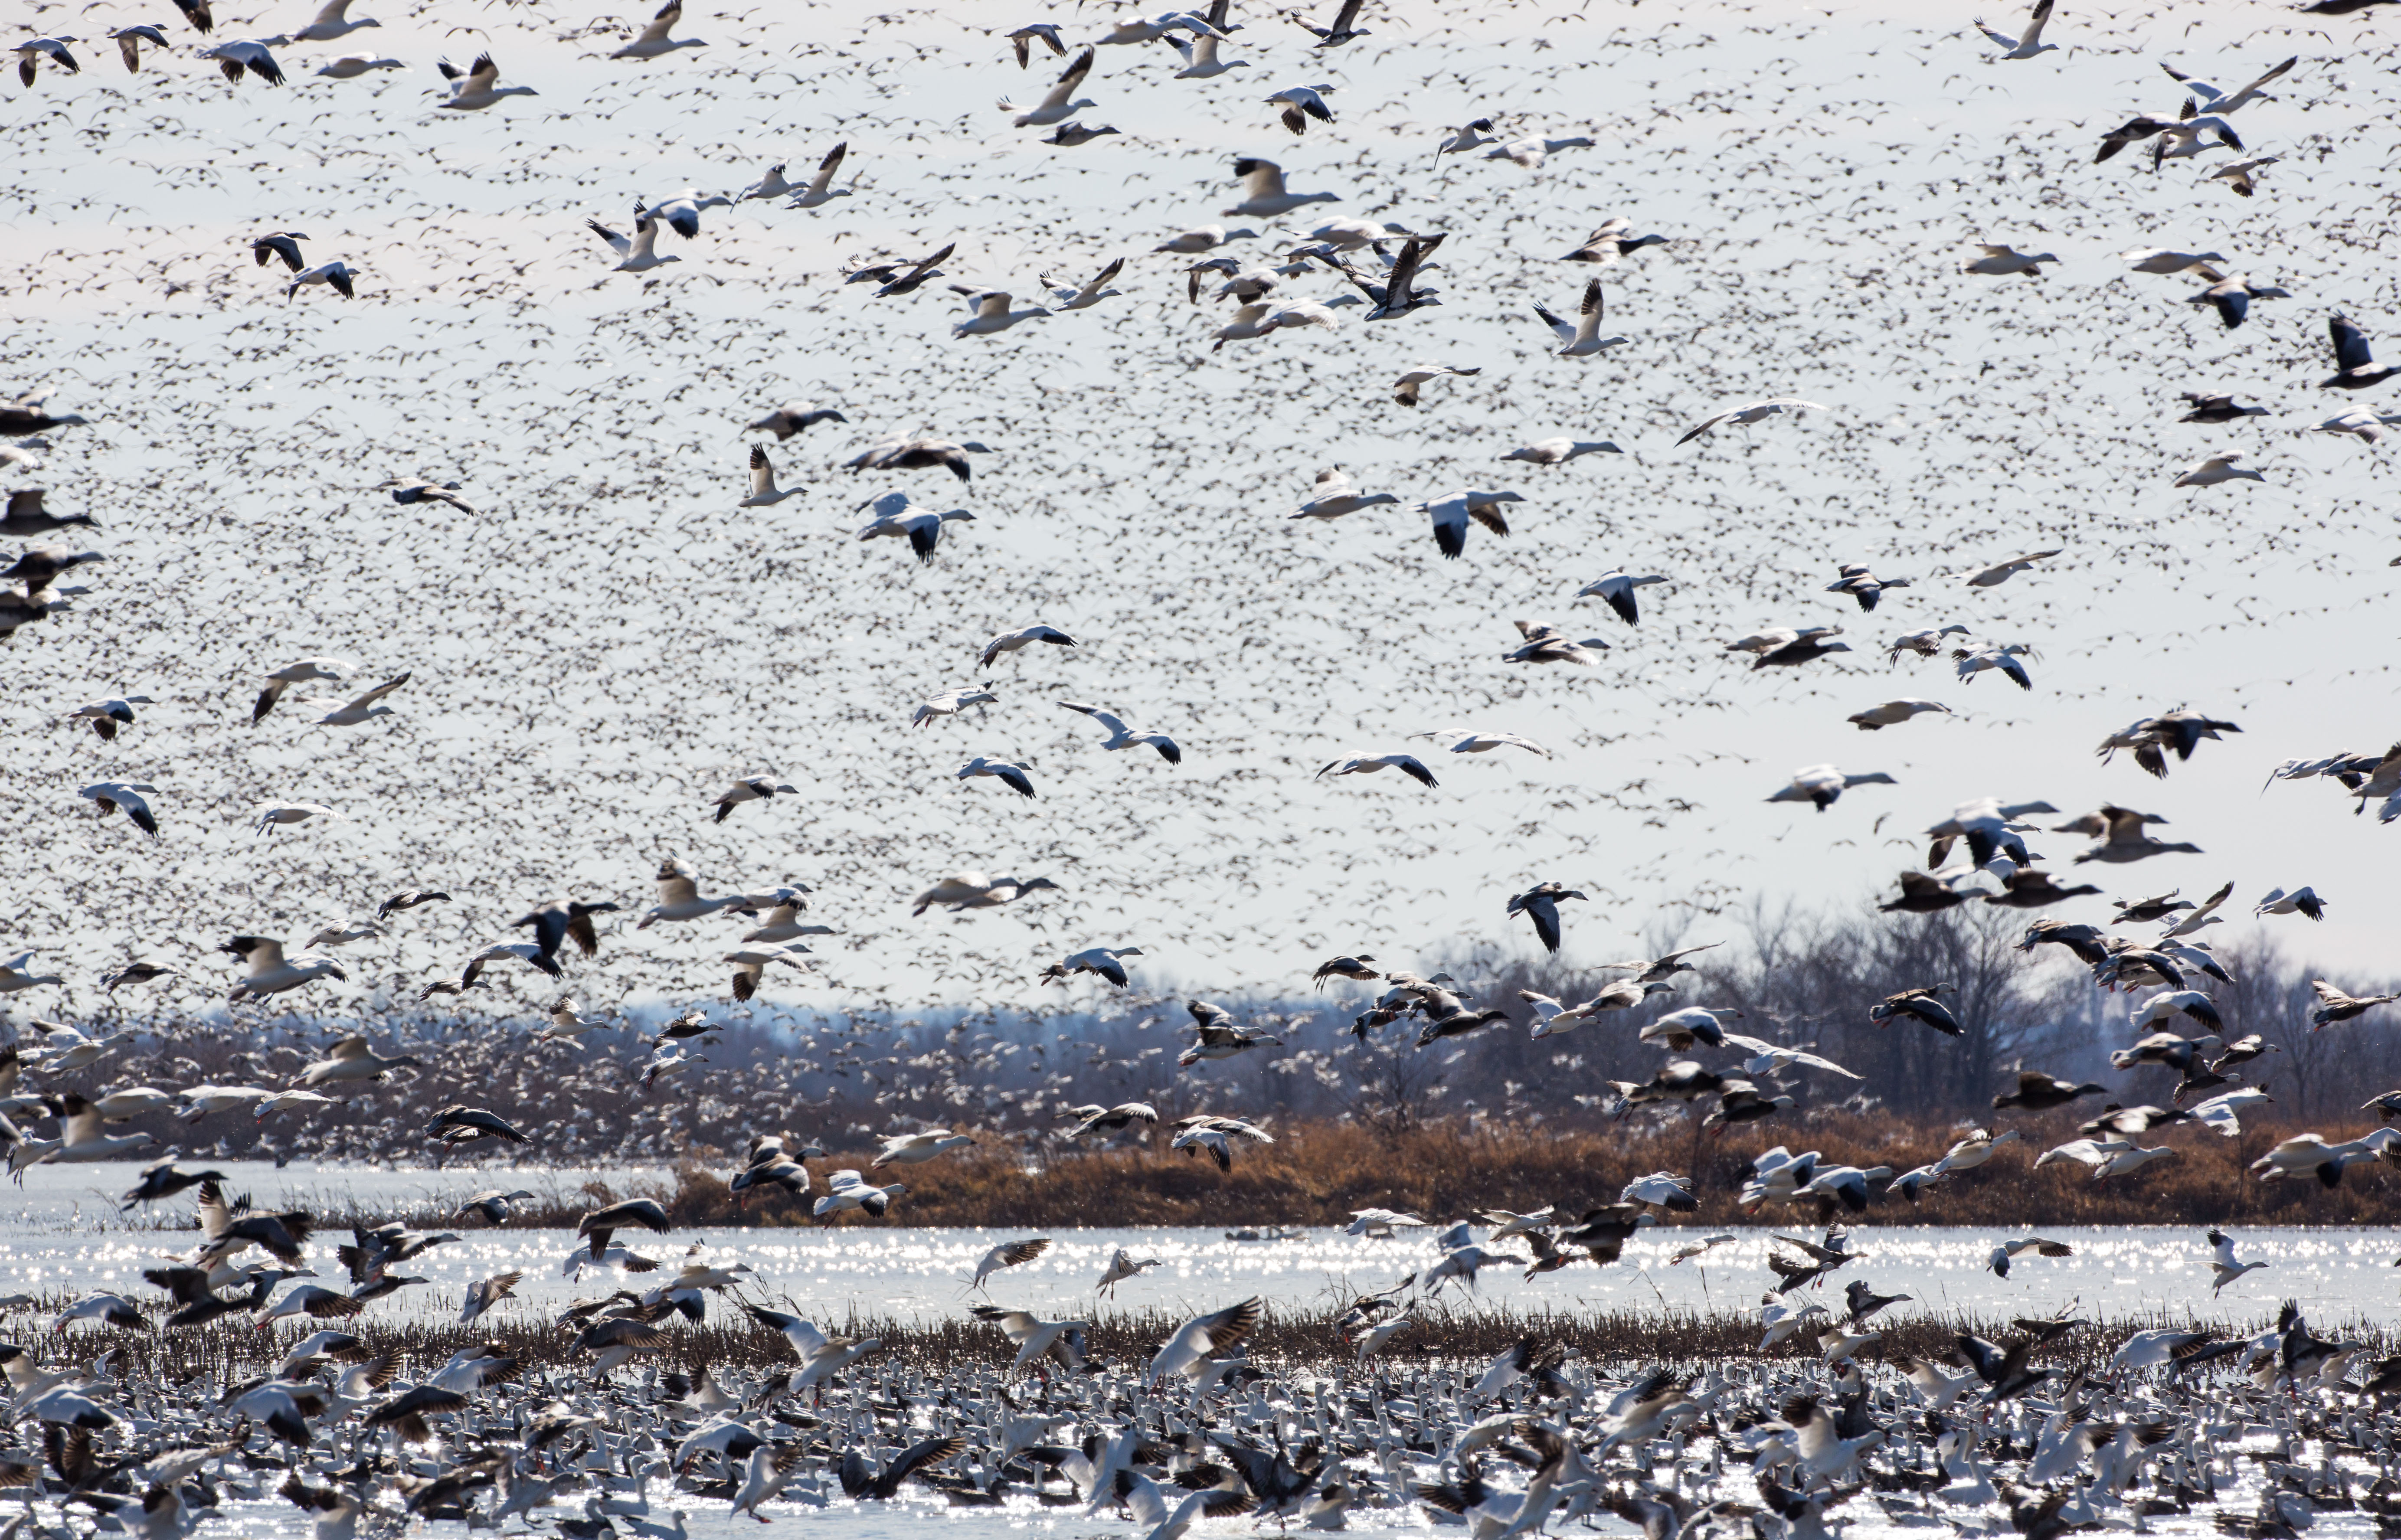 Snow geese, Loess Bluffs NWR, December 2019.  Click for next photo.